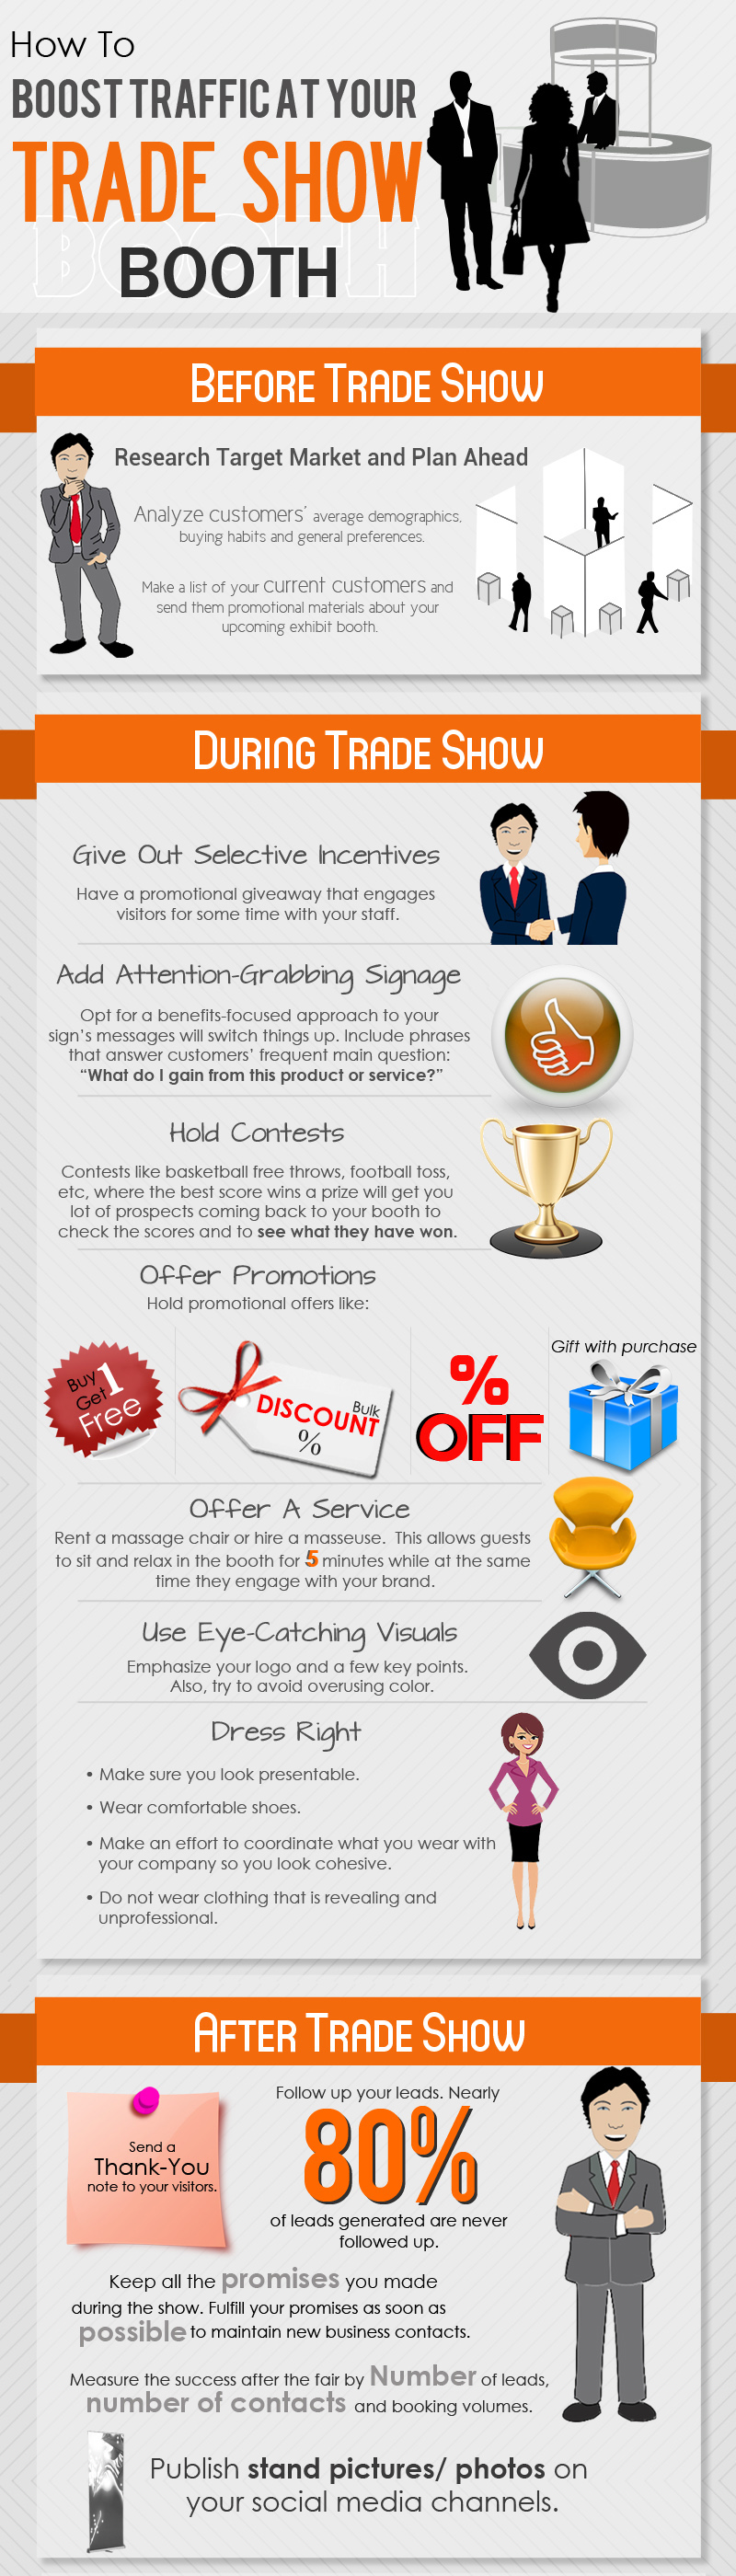 how to boost traffic at your trade show booth info graphic 5333b0a876a3b